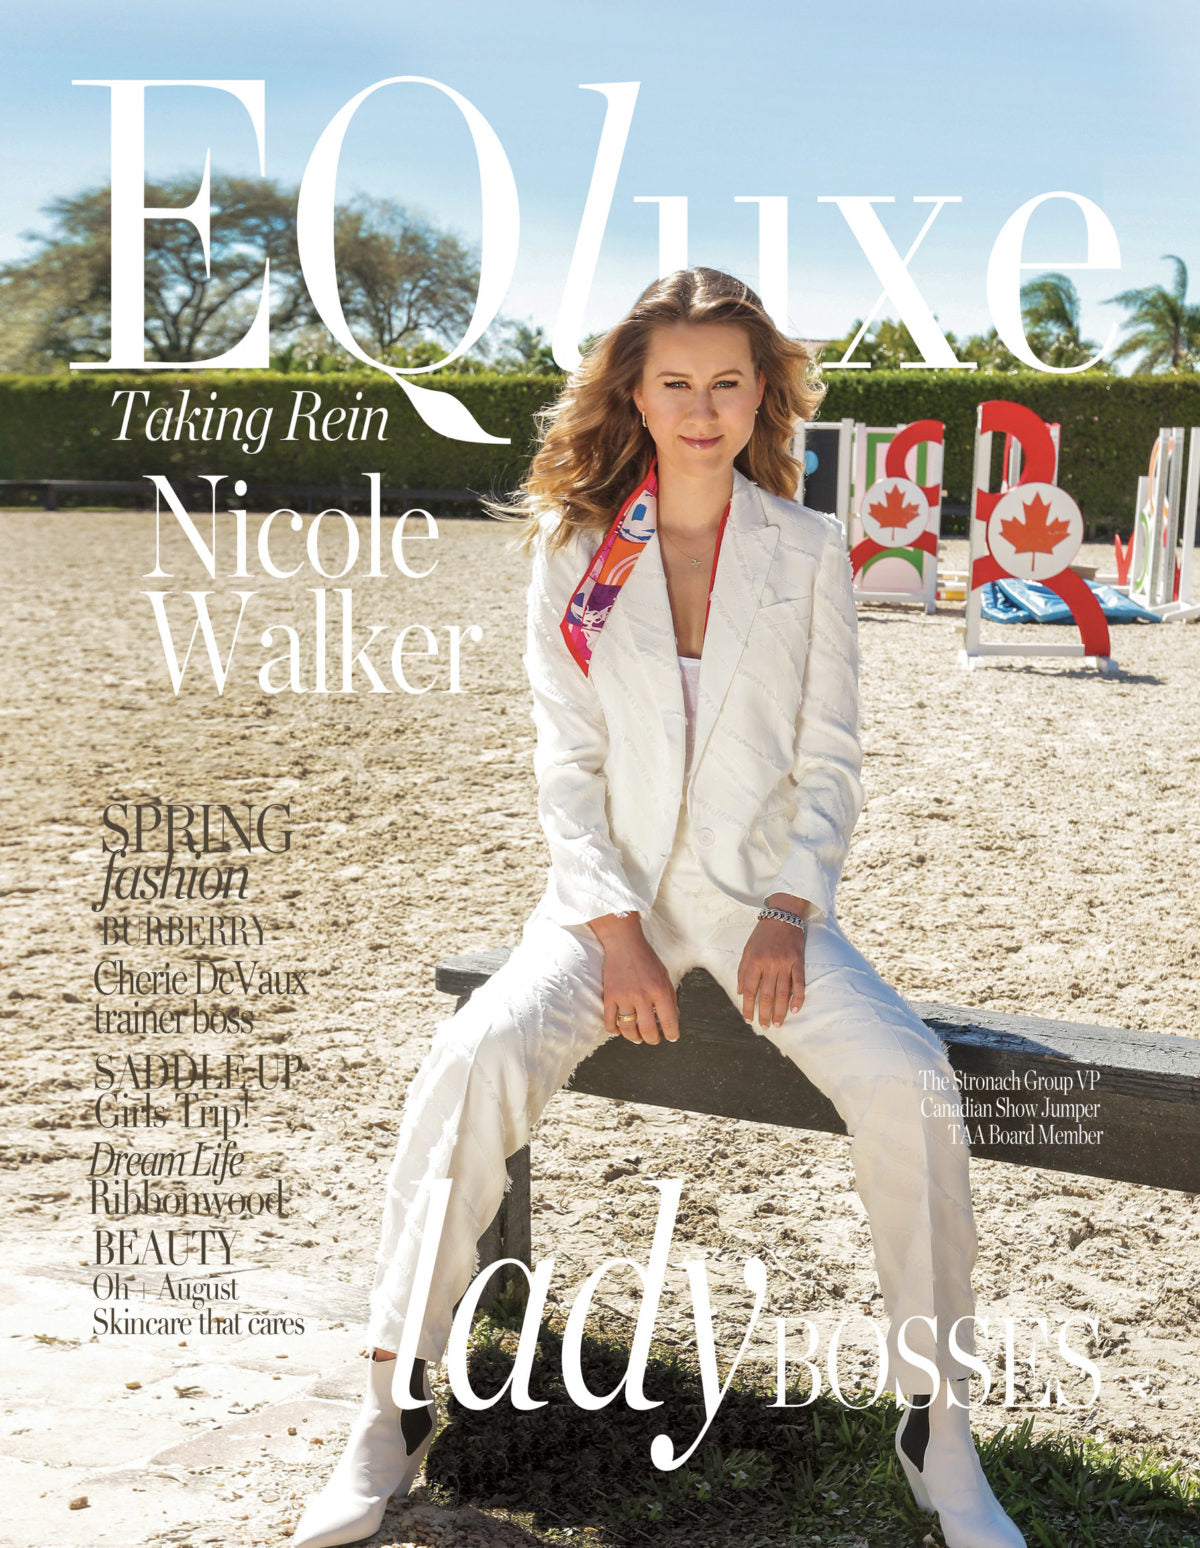 Featured at EQluxe Magazine